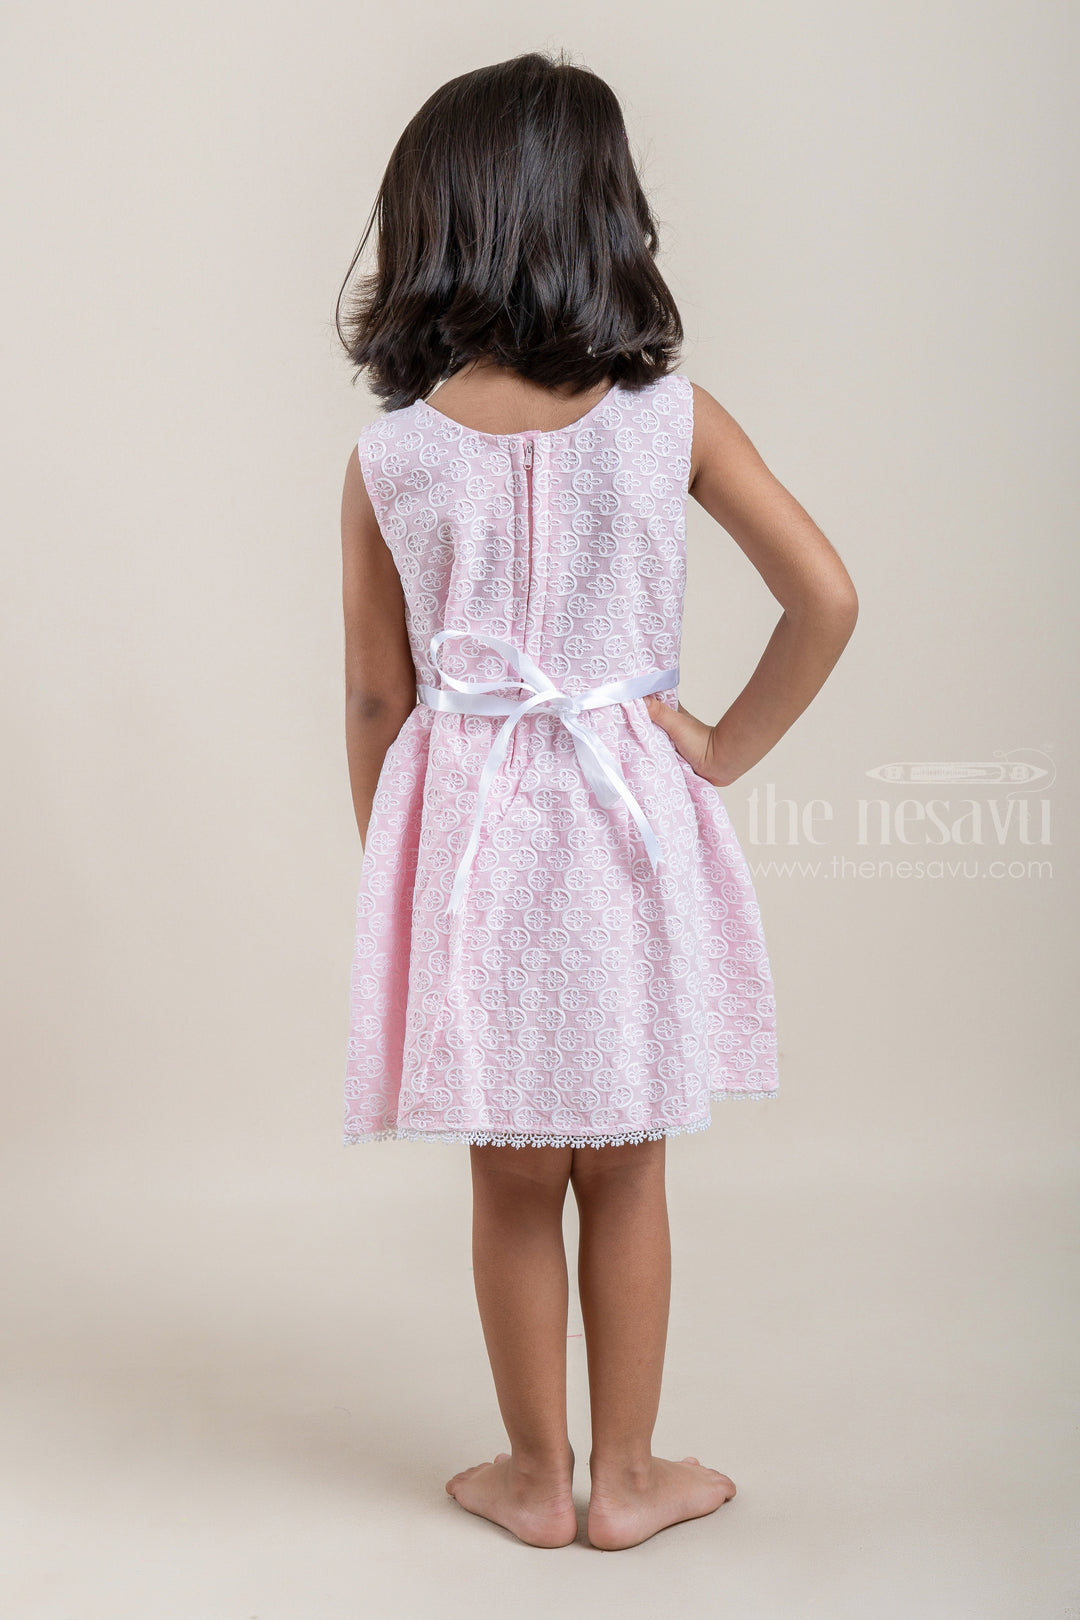 The Nesavu Baby Cotton Frocks All Over Floral Embroidered Pink Bamboo Cotton Frock For Baby Girls Nesavu All Over Floral Embroidered Pink Bamboo Cotton Baby Frock | The Nesavu